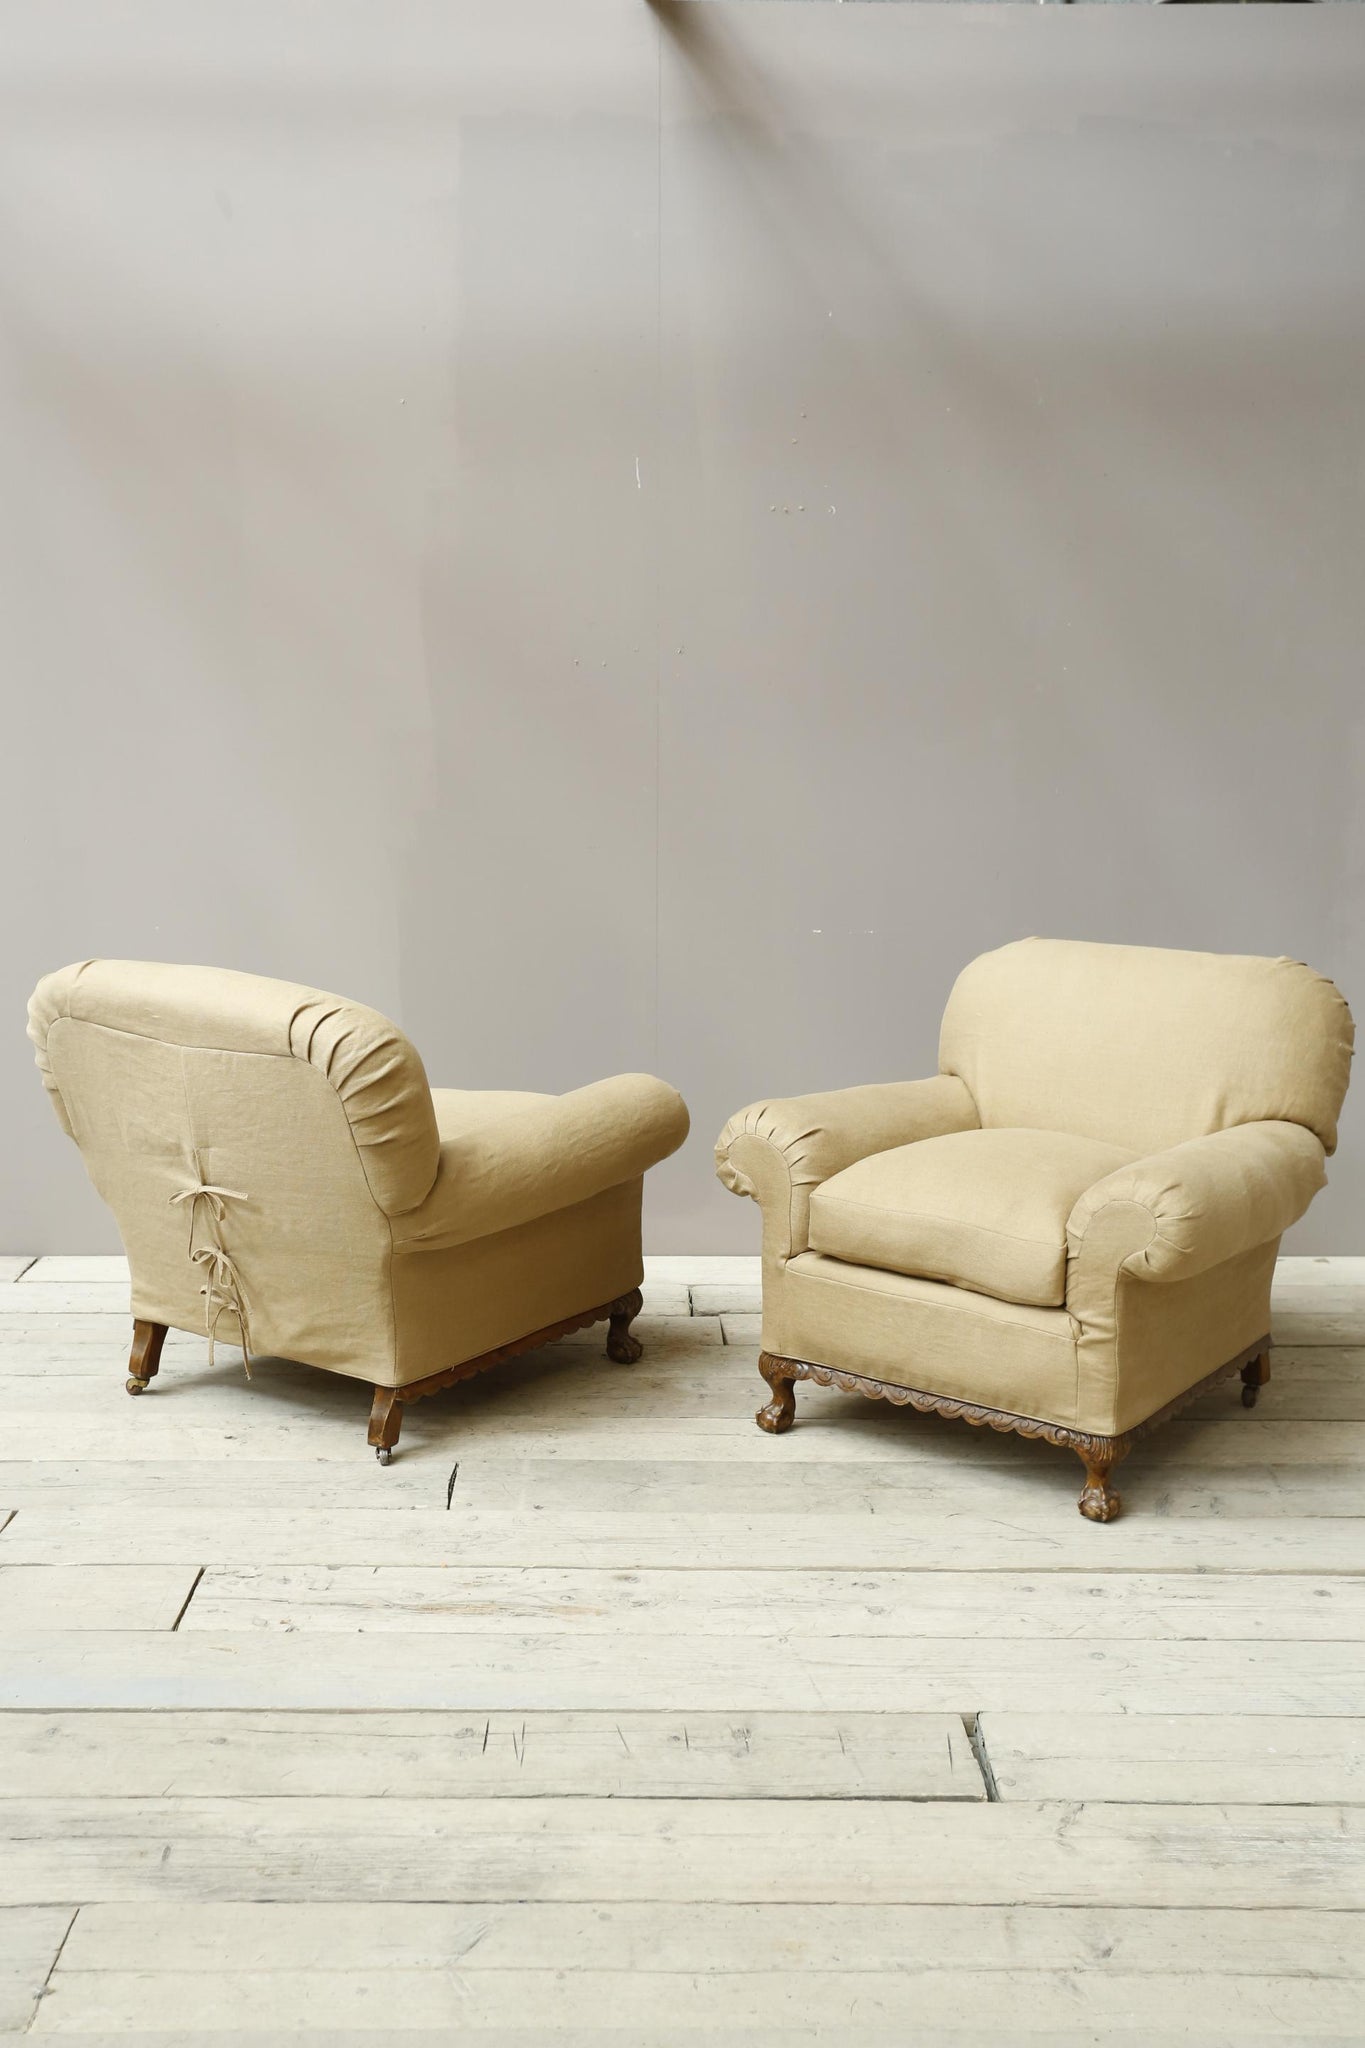 Pair of Early 20th century ball and claw country house armchairs